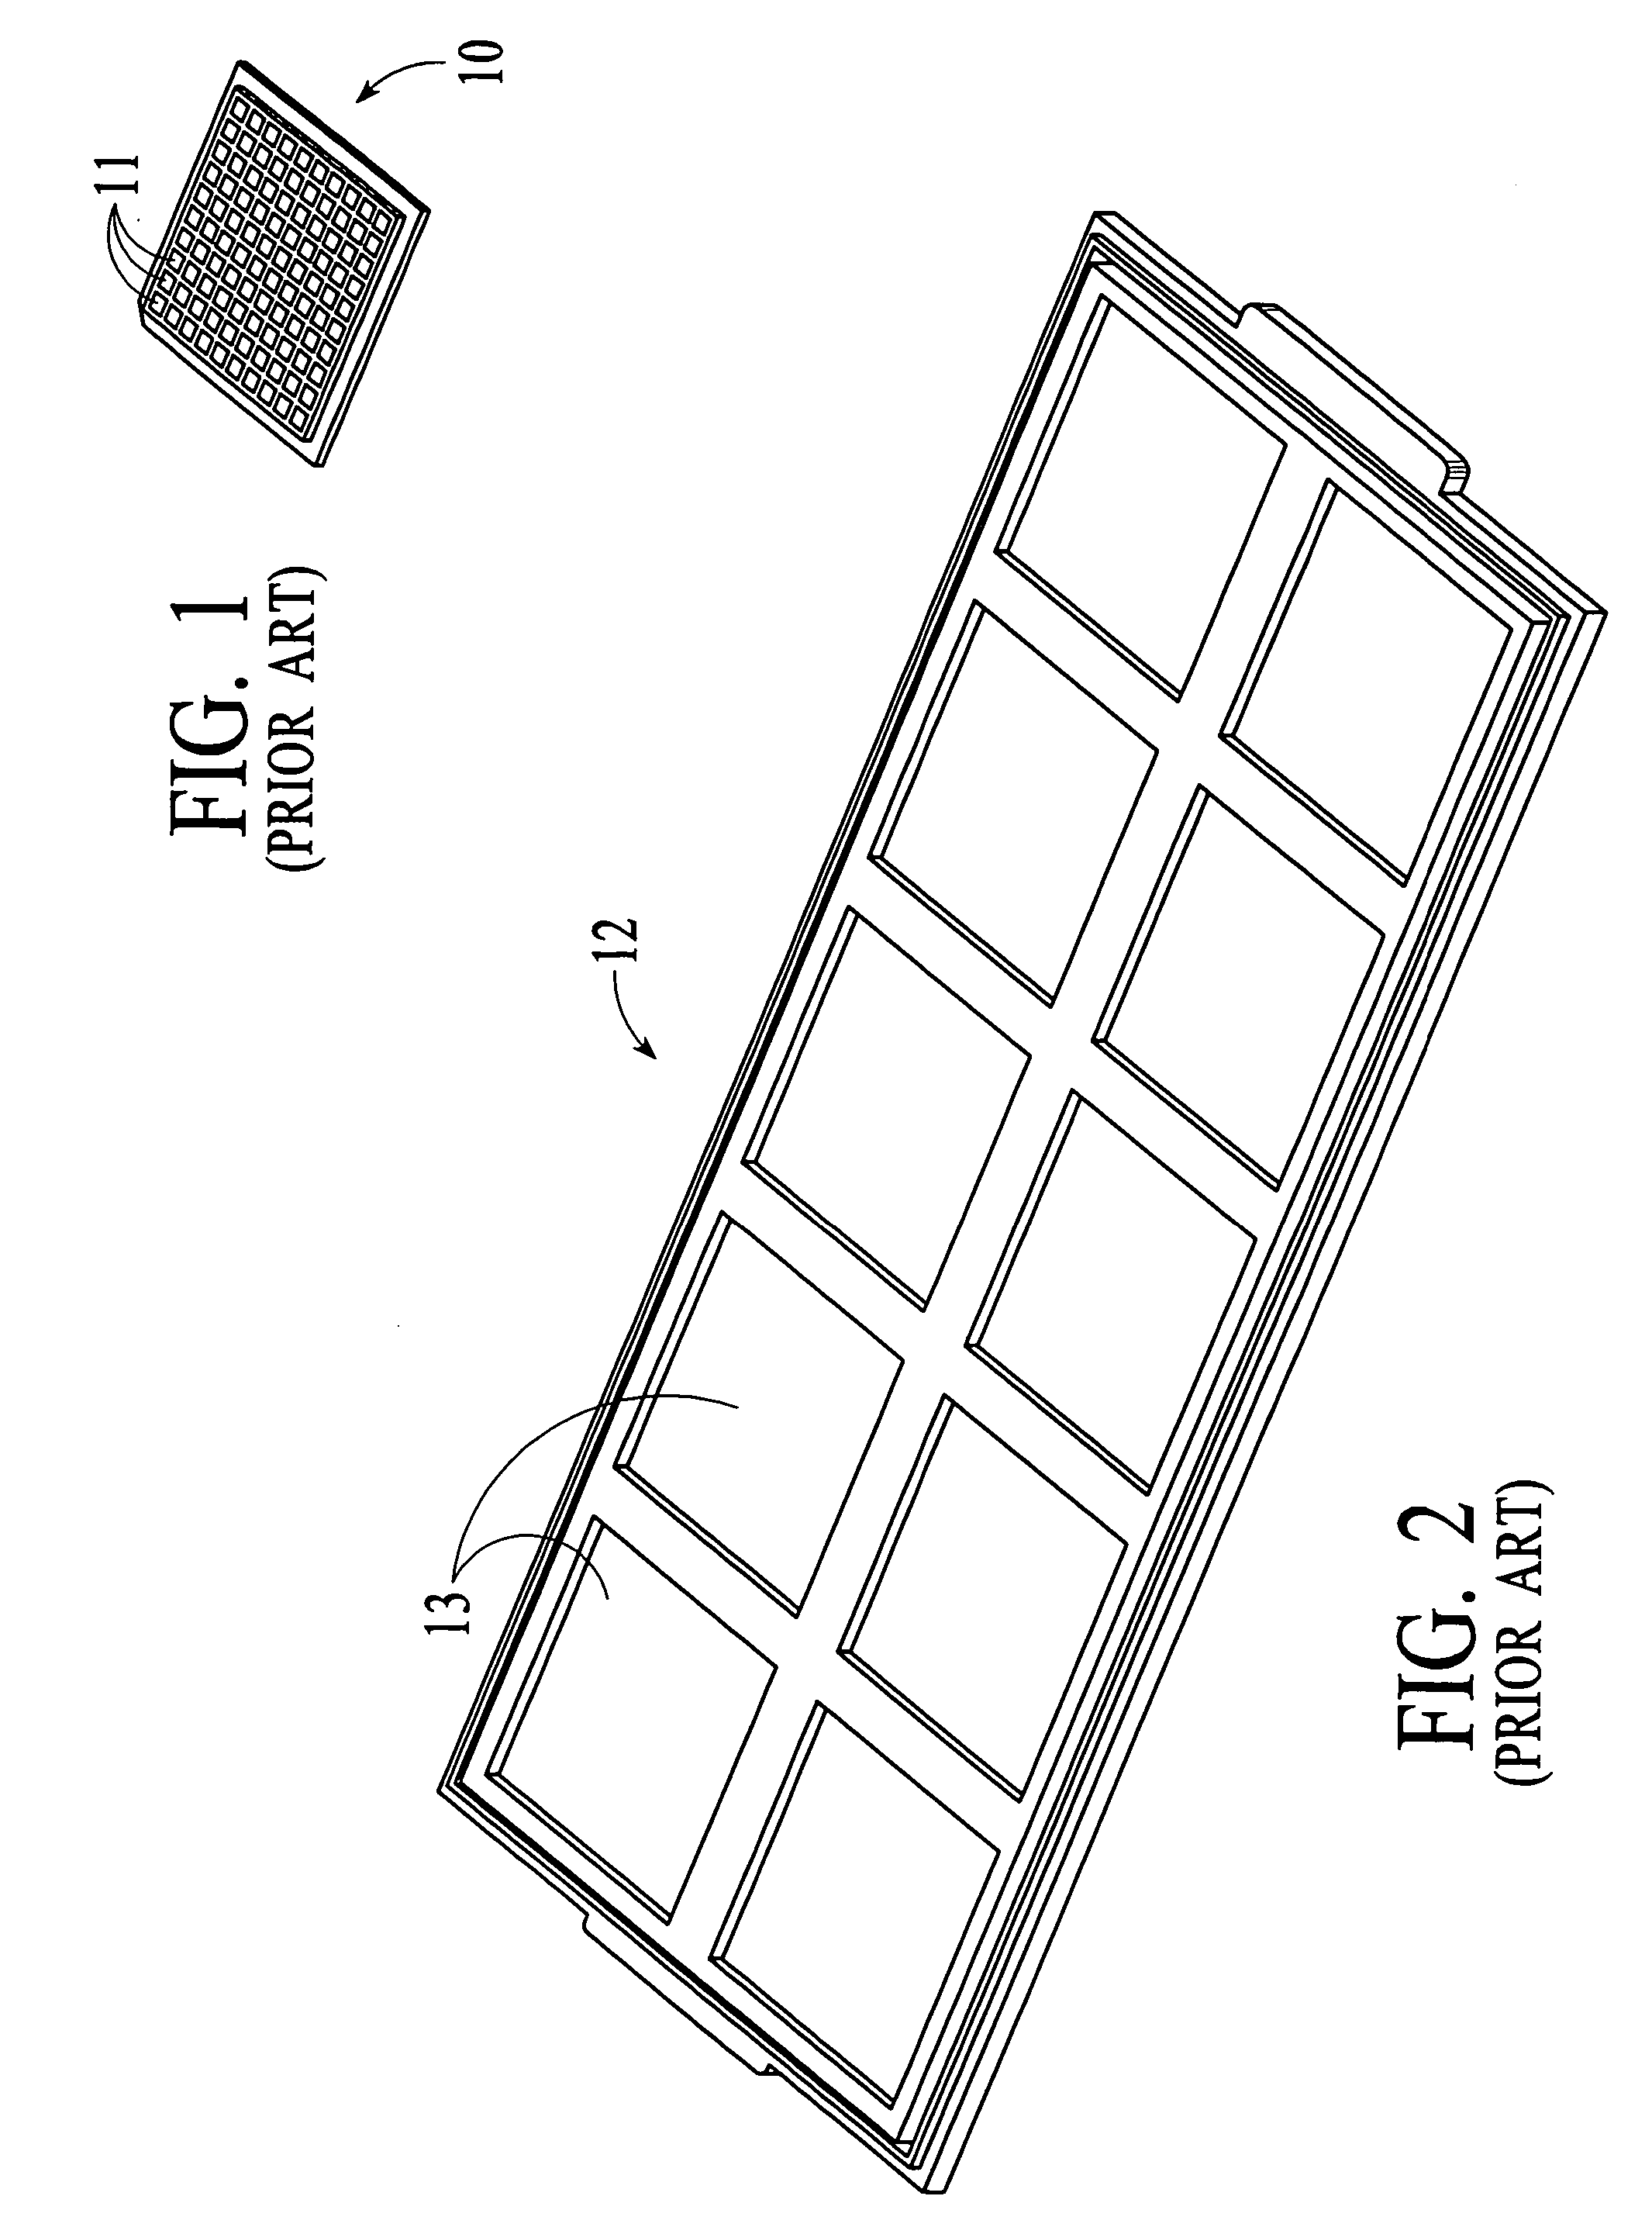 Self aligning tray and carrier apparatus